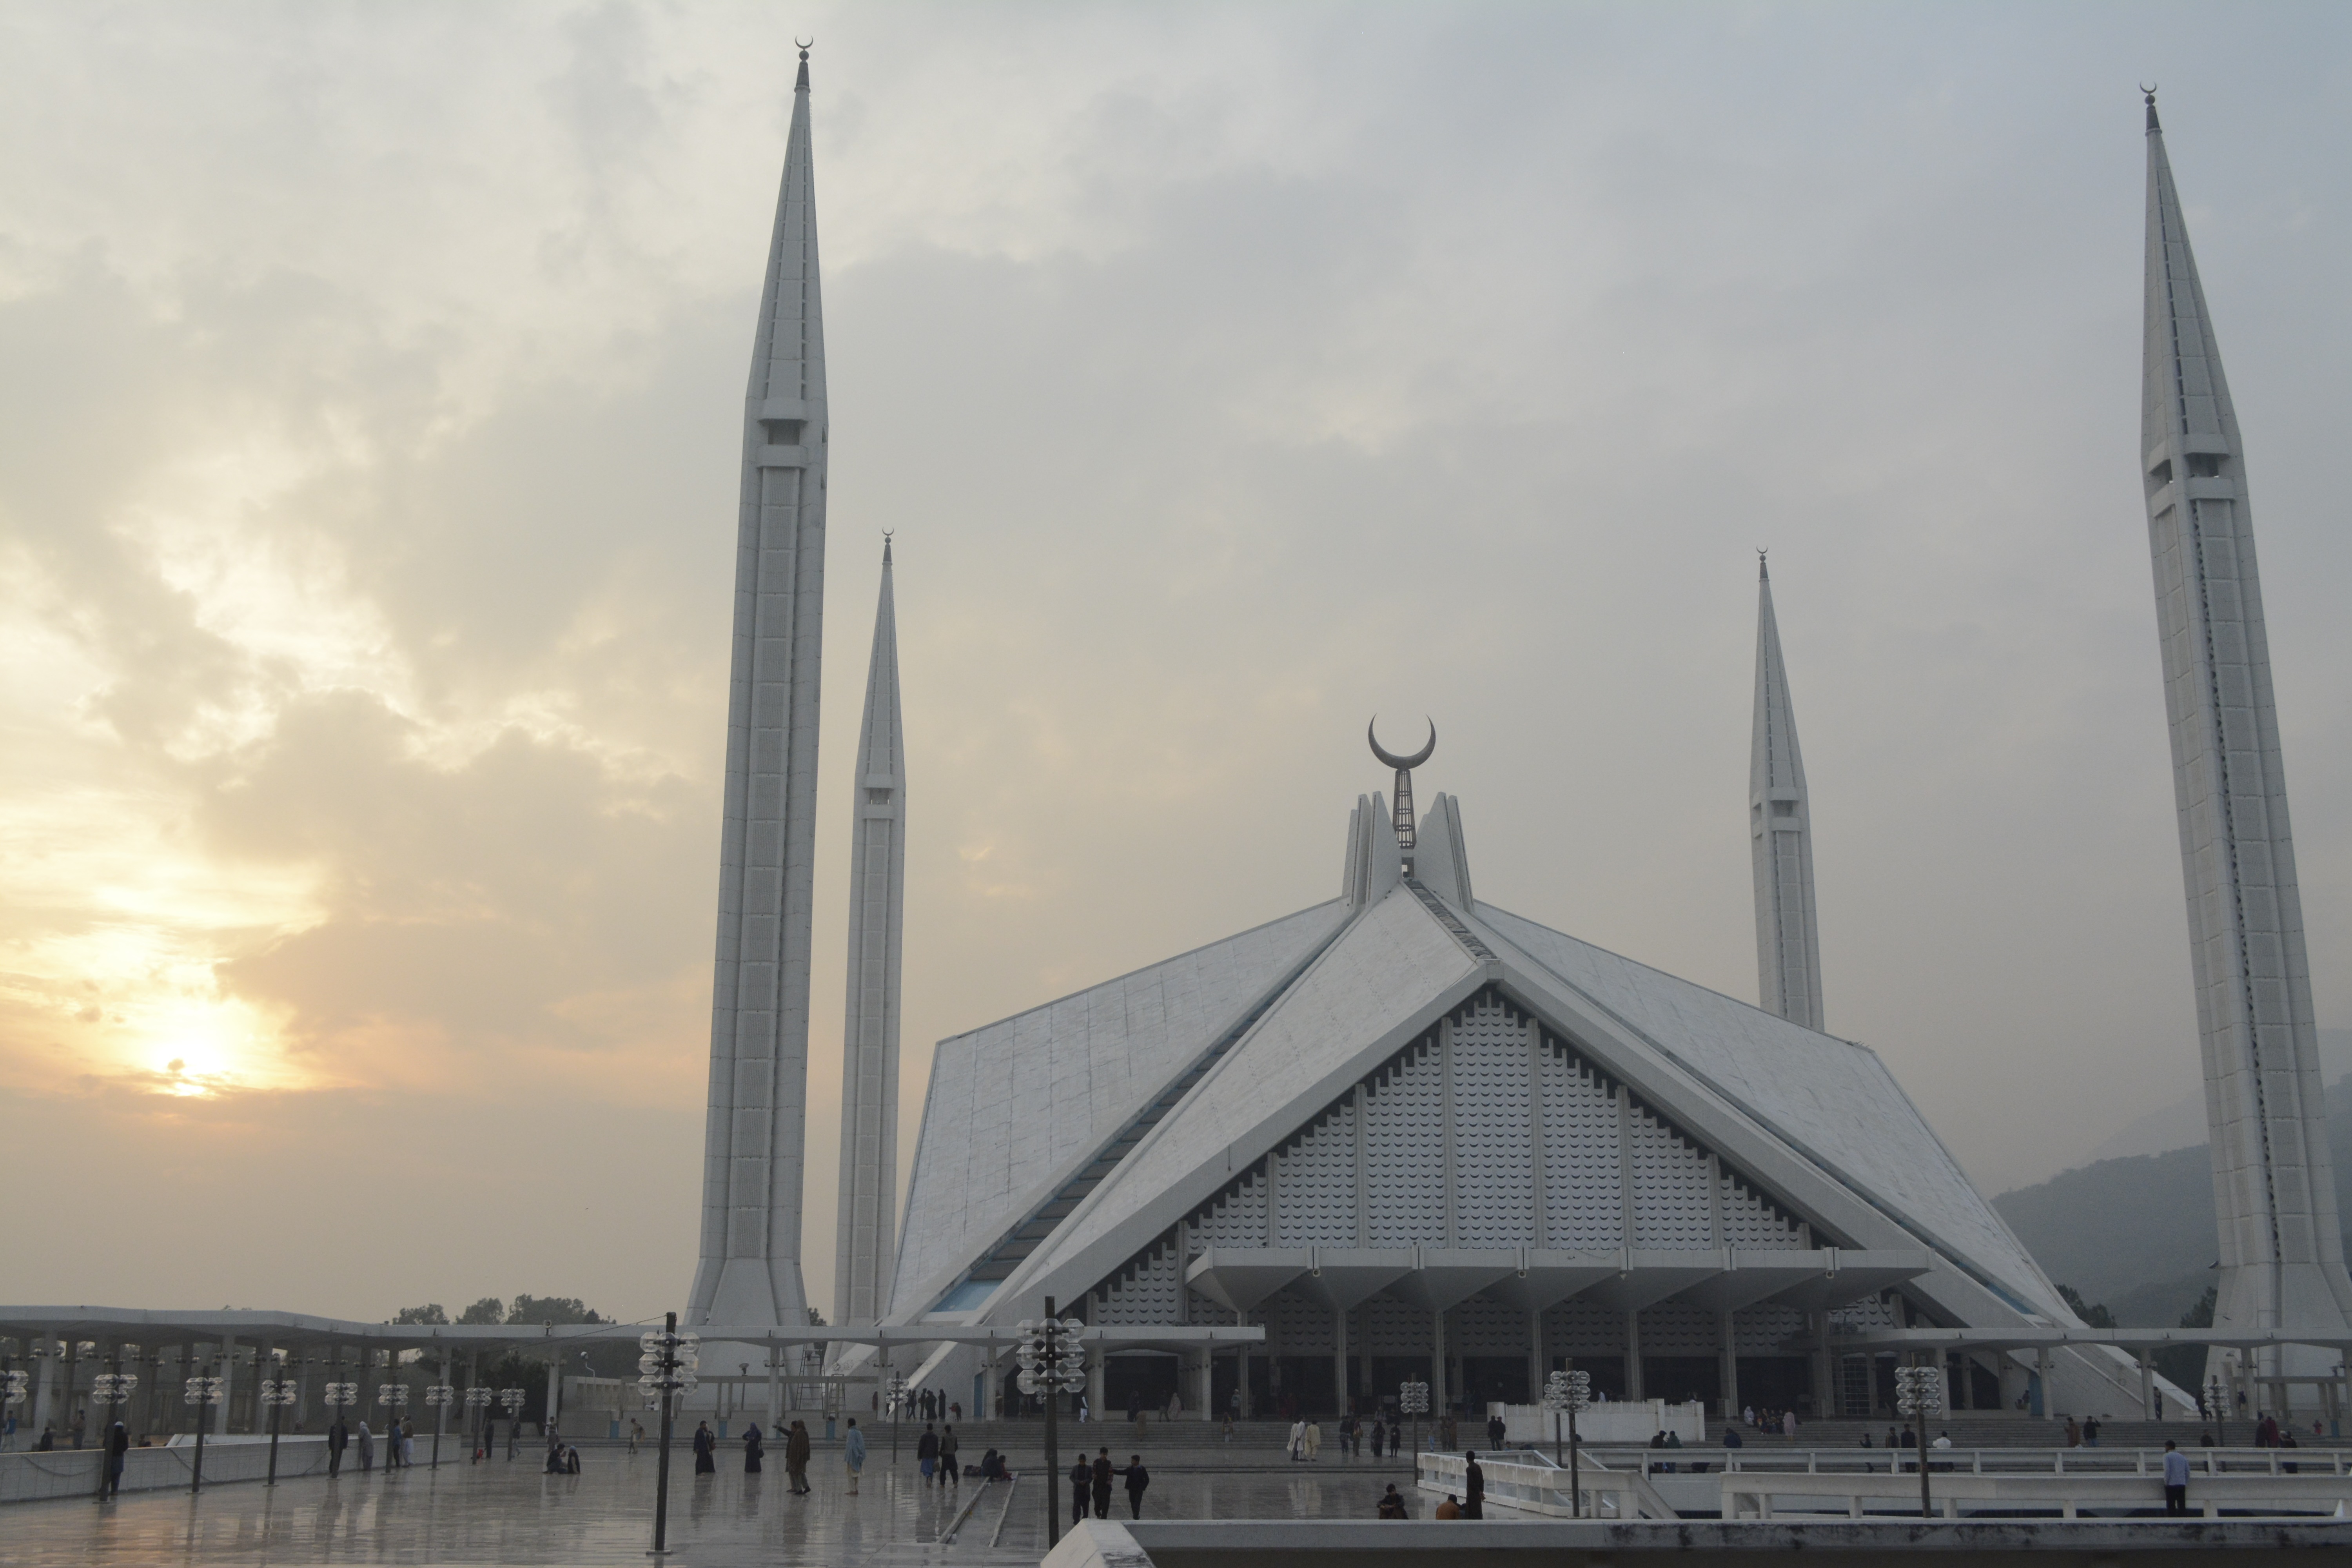 "Faisal Mosque" reflective of the contemporary and influential feature of modern Islamic architecture